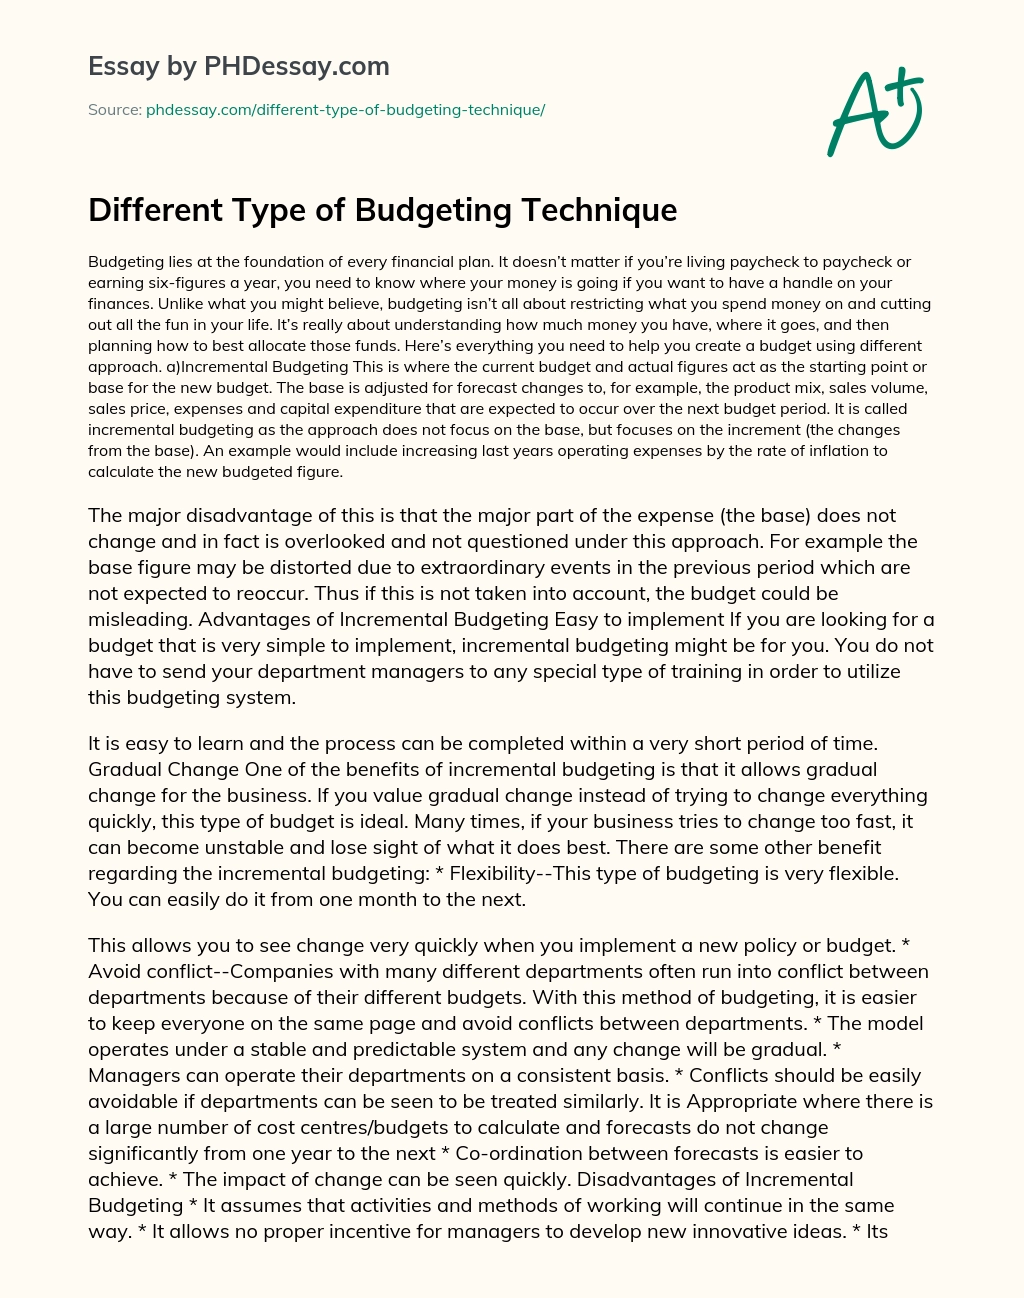 Different Type of Budgeting Technique essay